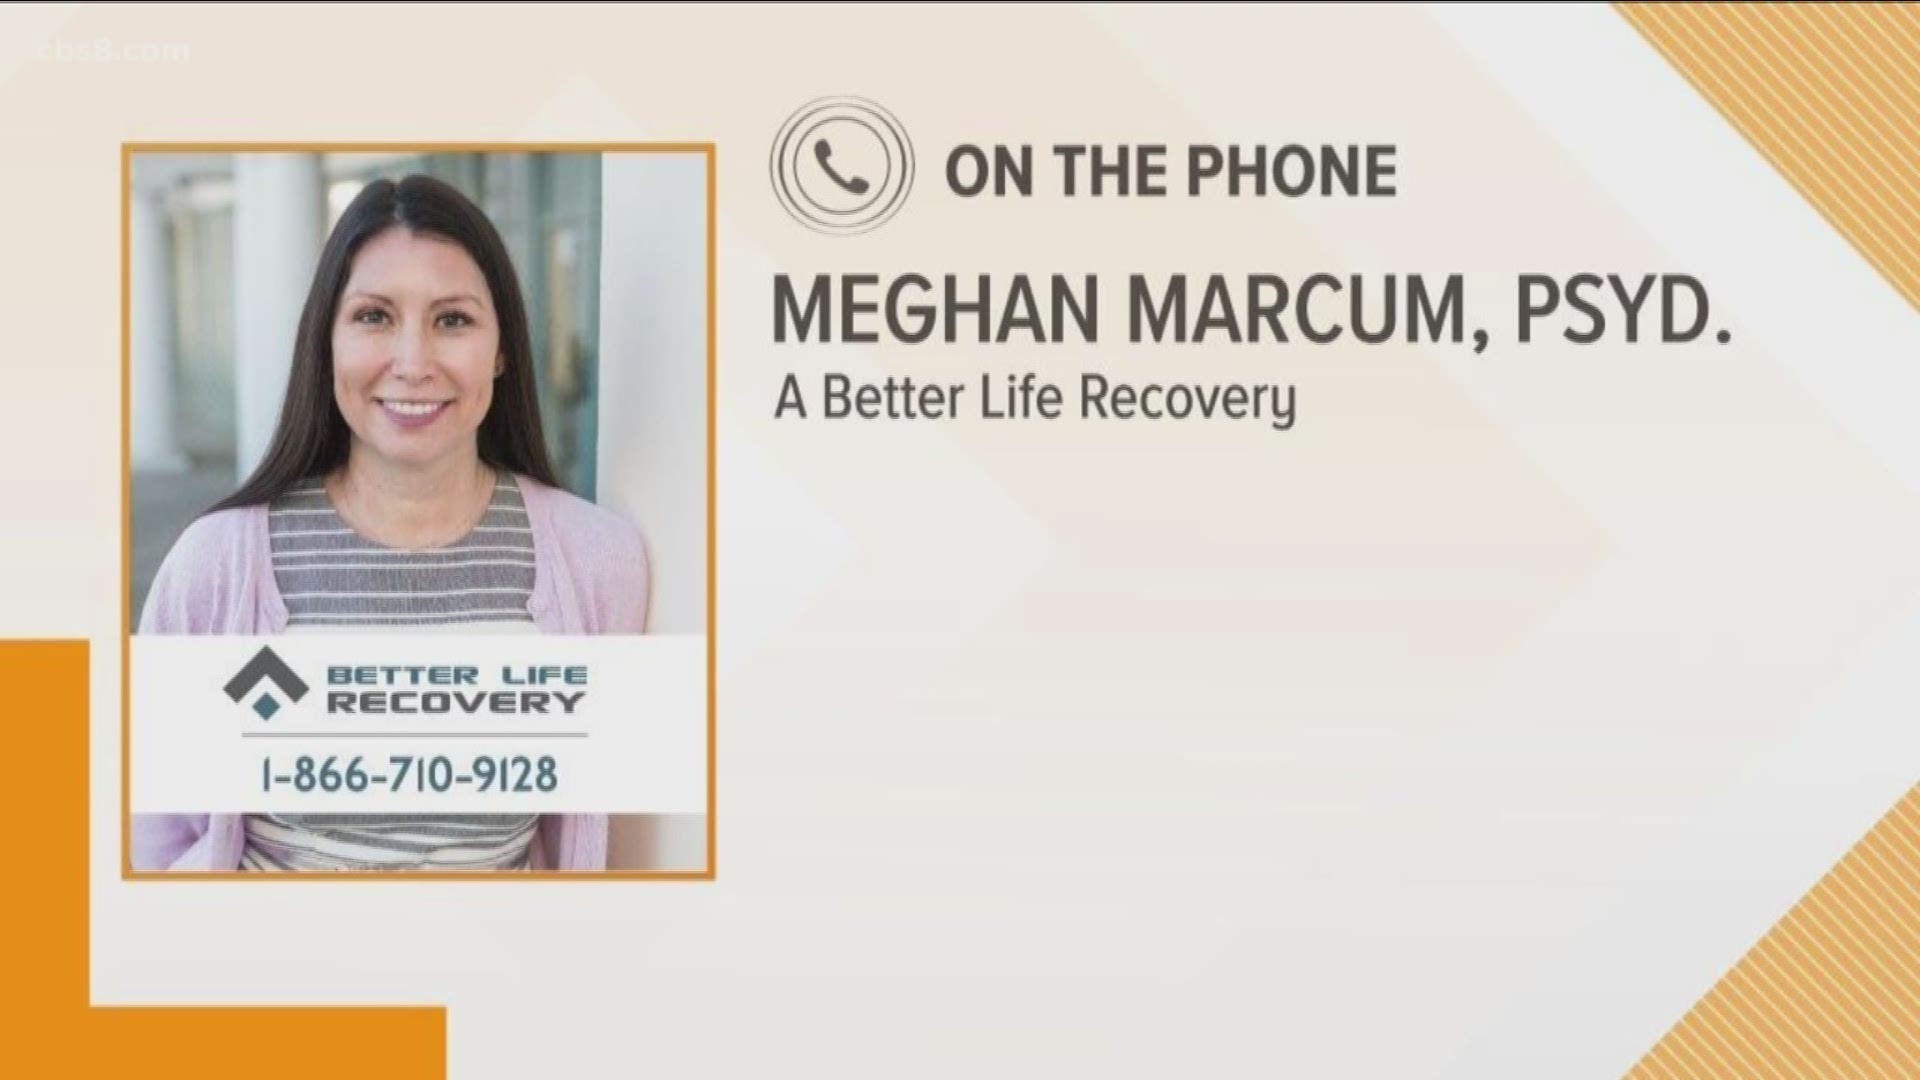 Chemical Dependency Specialist and Chief Clinical Officer at A Better Life Recovery, Dr. Meghan Marcum joined us on the phone to discuss the effects of isolation.